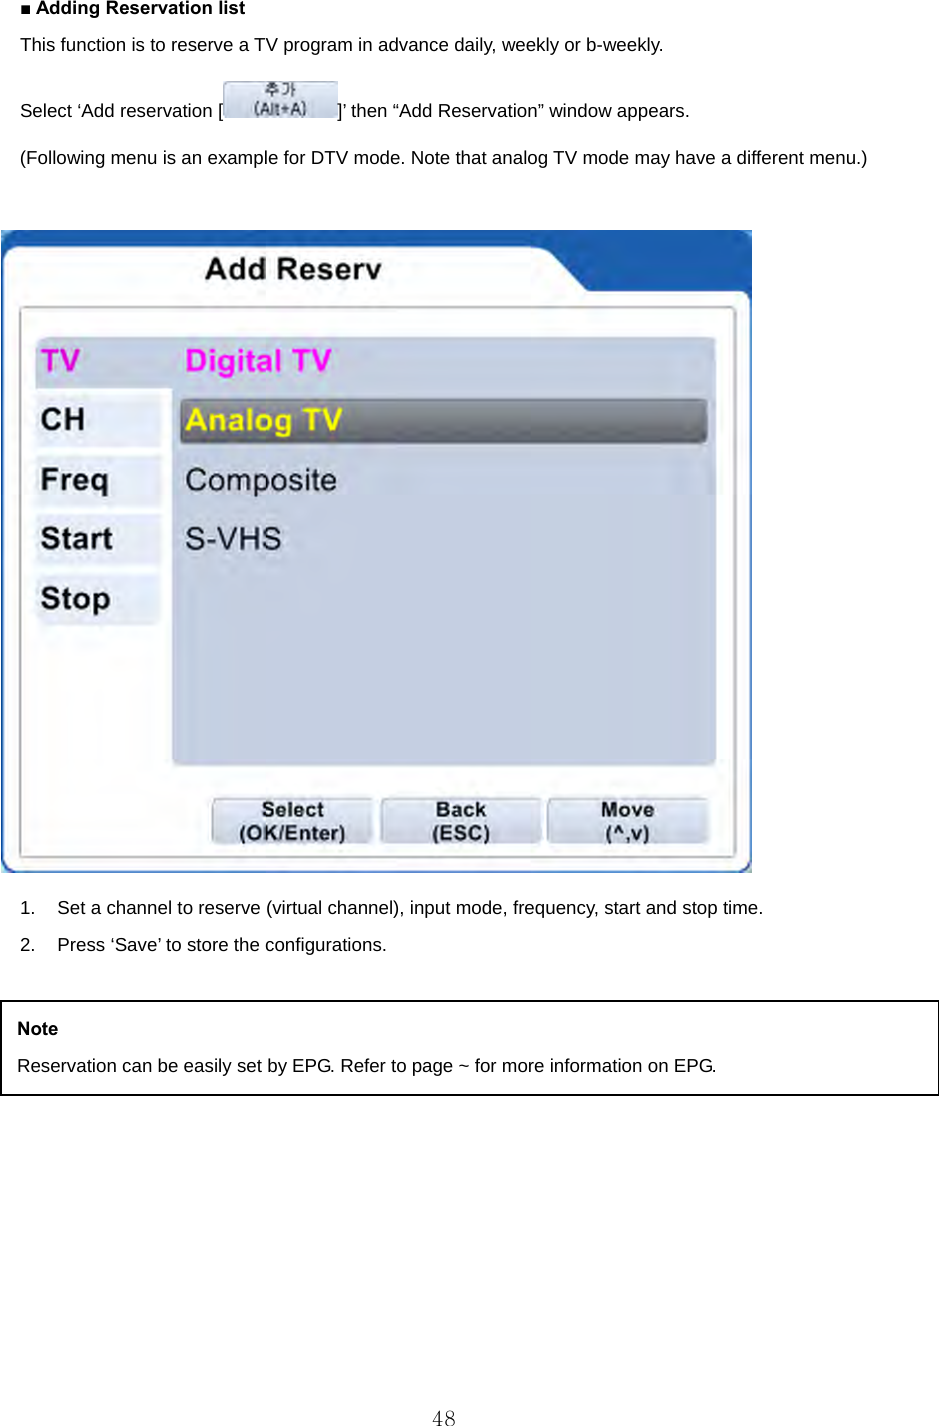 ■ Adding Reservation list This function is to reserve a TV program in advance daily, weekly or b-weekly. Select ‘Add reservation [ ]’ then “Add Reservation” window appears.   (Following menu is an example for DTV mode. Note that analog TV mode may have a different menu.)   1.  Set a channel to reserve (virtual channel), input mode, frequency, start and stop time.   2.  Press ‘Save’ to store the configurations.         Note Reservation can be easily set by EPG. Refer to page ~ for more information on EPG.  48